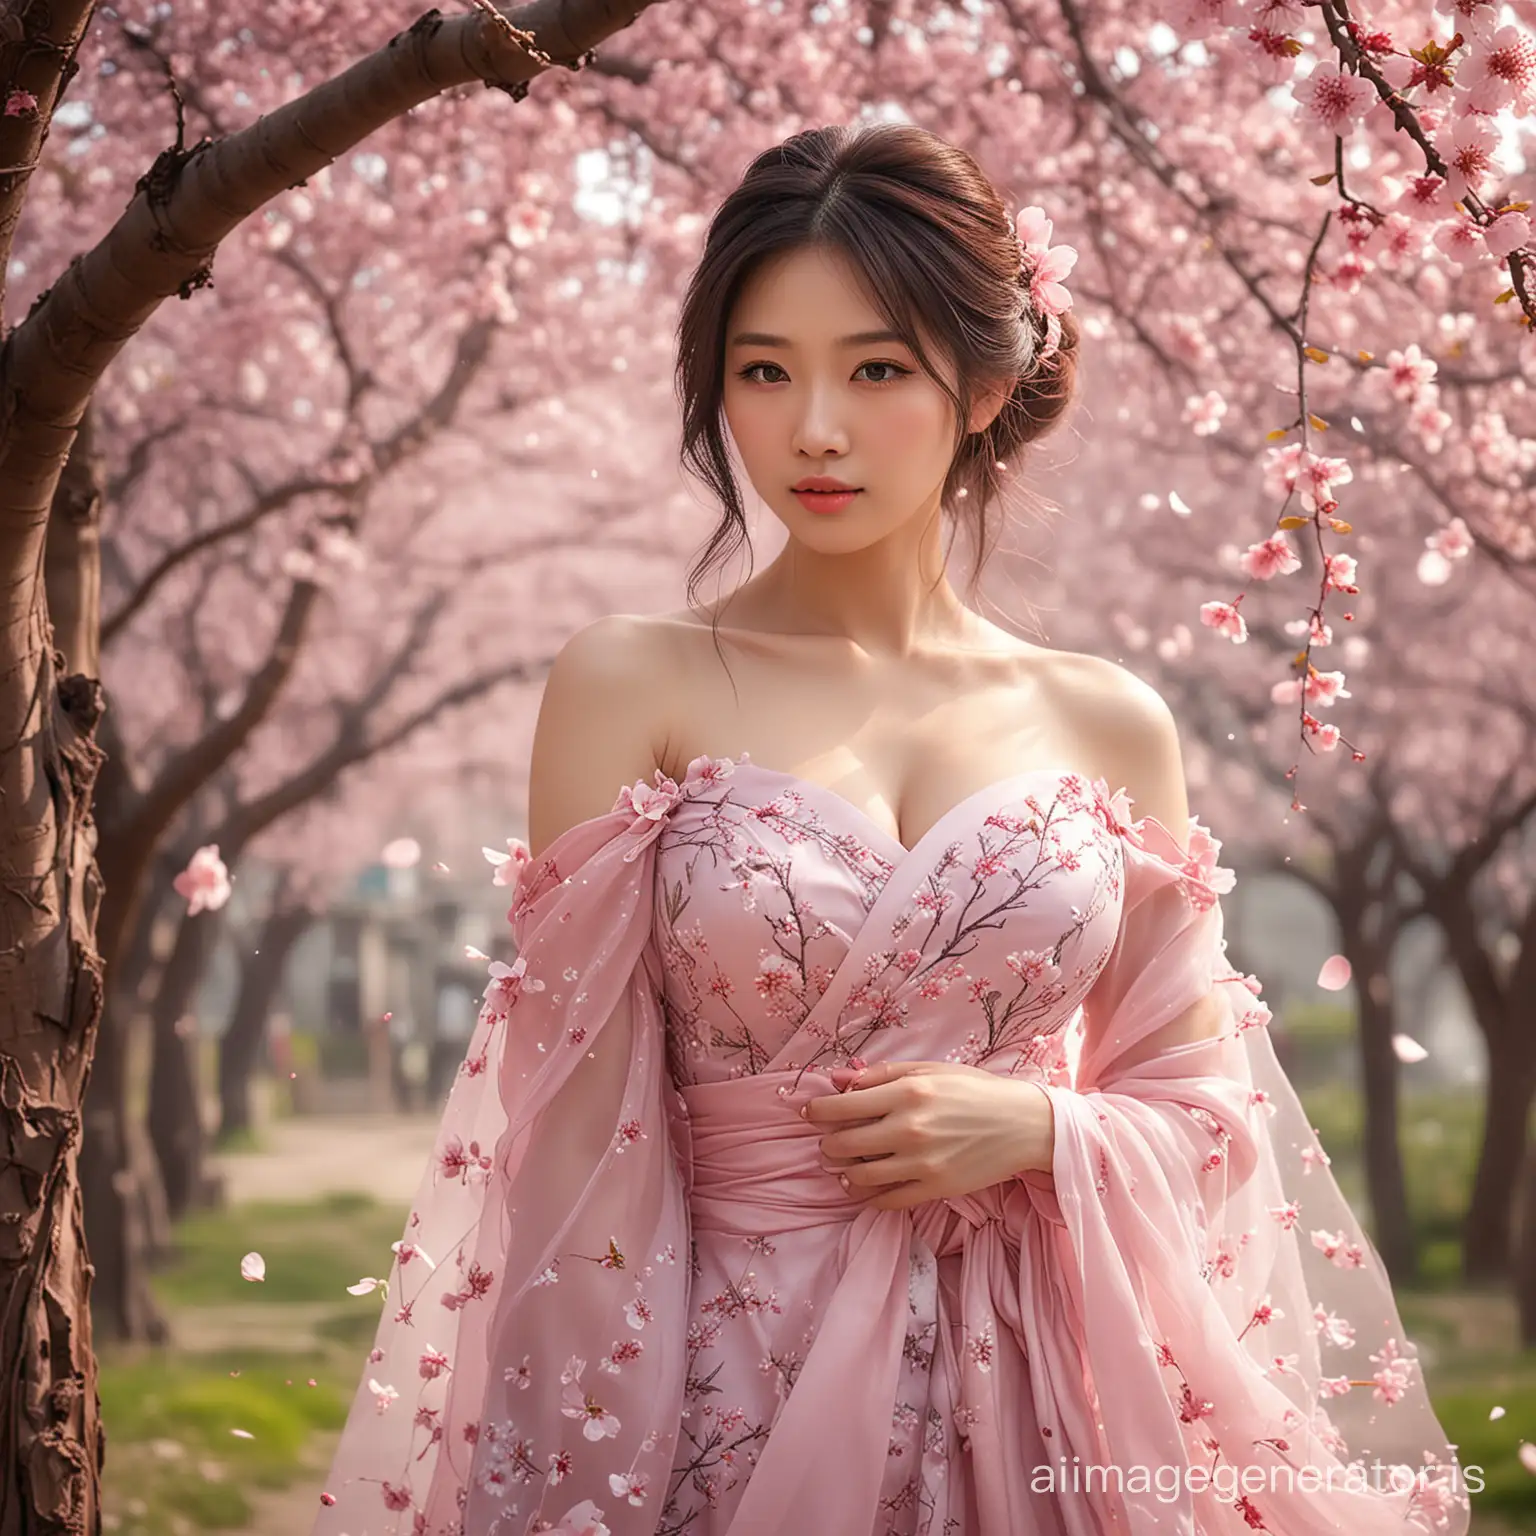 a korean woman,bitten lips, very big breasts, firm breasts,standing under a tree with pink flowers, cherry blossom background, realistic fantasy photography, cherry blossom petals, beautiful aerith gainborough, cherry blossoms blowing in the wind, girl beautiful fantasy, cherry blossoms, cherry blossoms, cherry blossoms in the background, cherry blossoms, lost in a beautiful fairy landscape," beautiful anime woman, ethereal fairy tale, by Anna Katharina Block